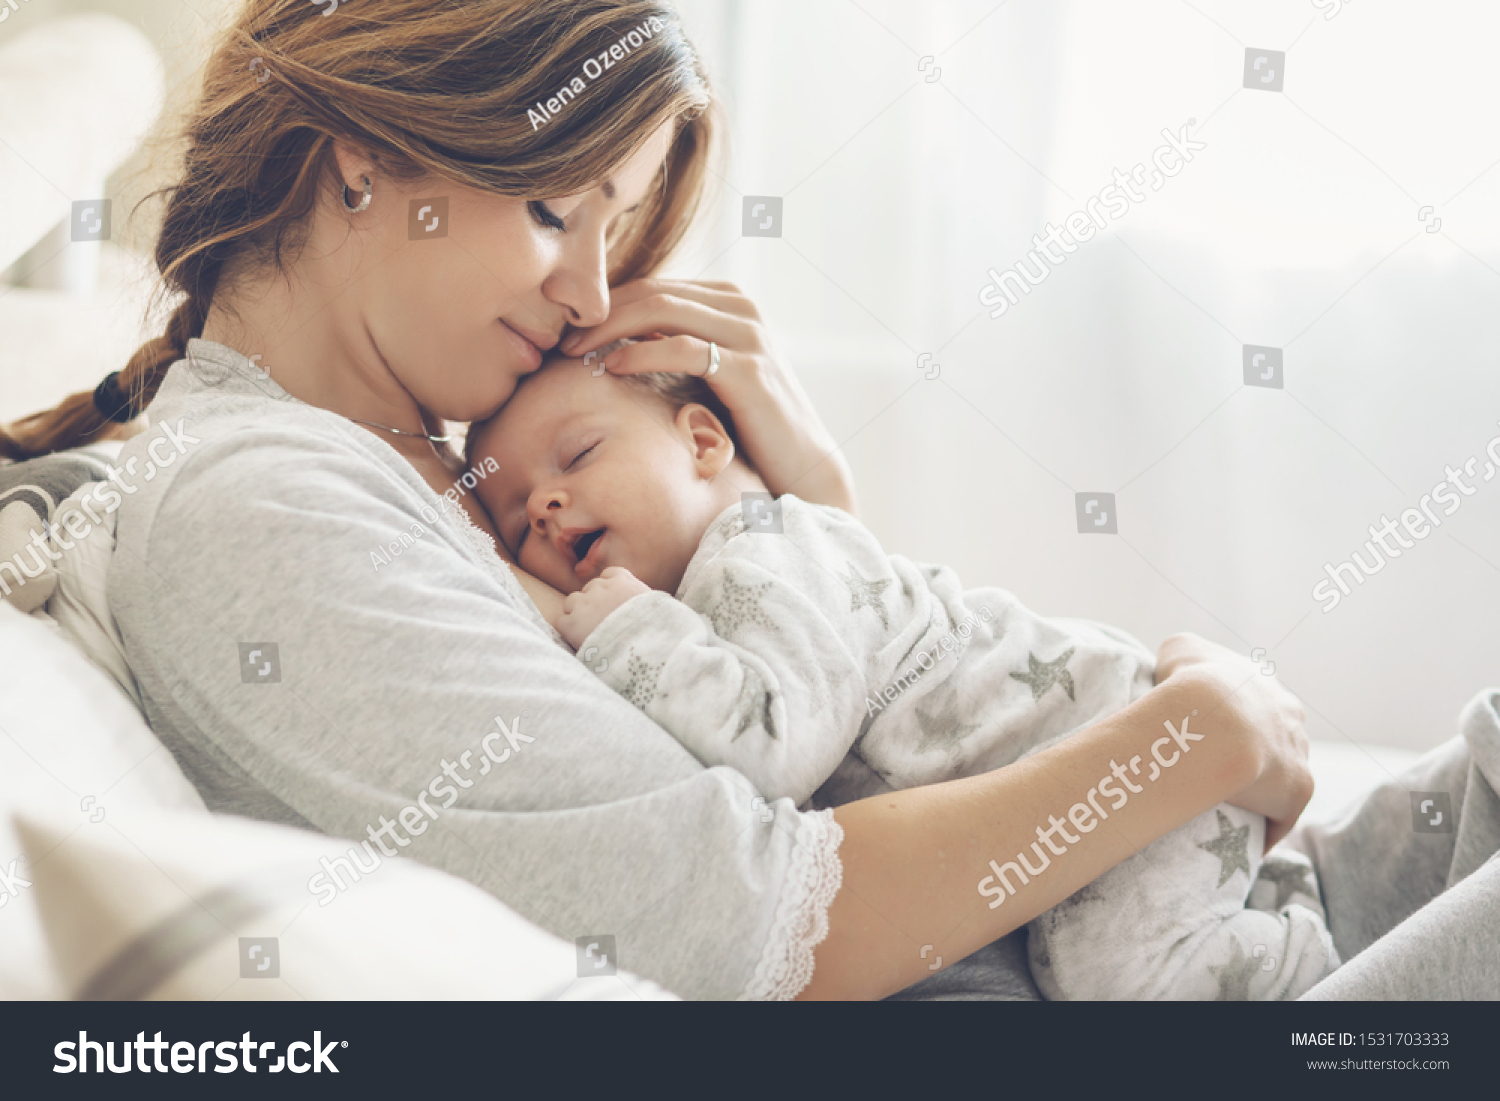 Loving mom carying of her newborn baby at home. Bright portrait of happy mum holding sleeping infant child on hands. Mother hugging her little 2 months old son. #1531703333